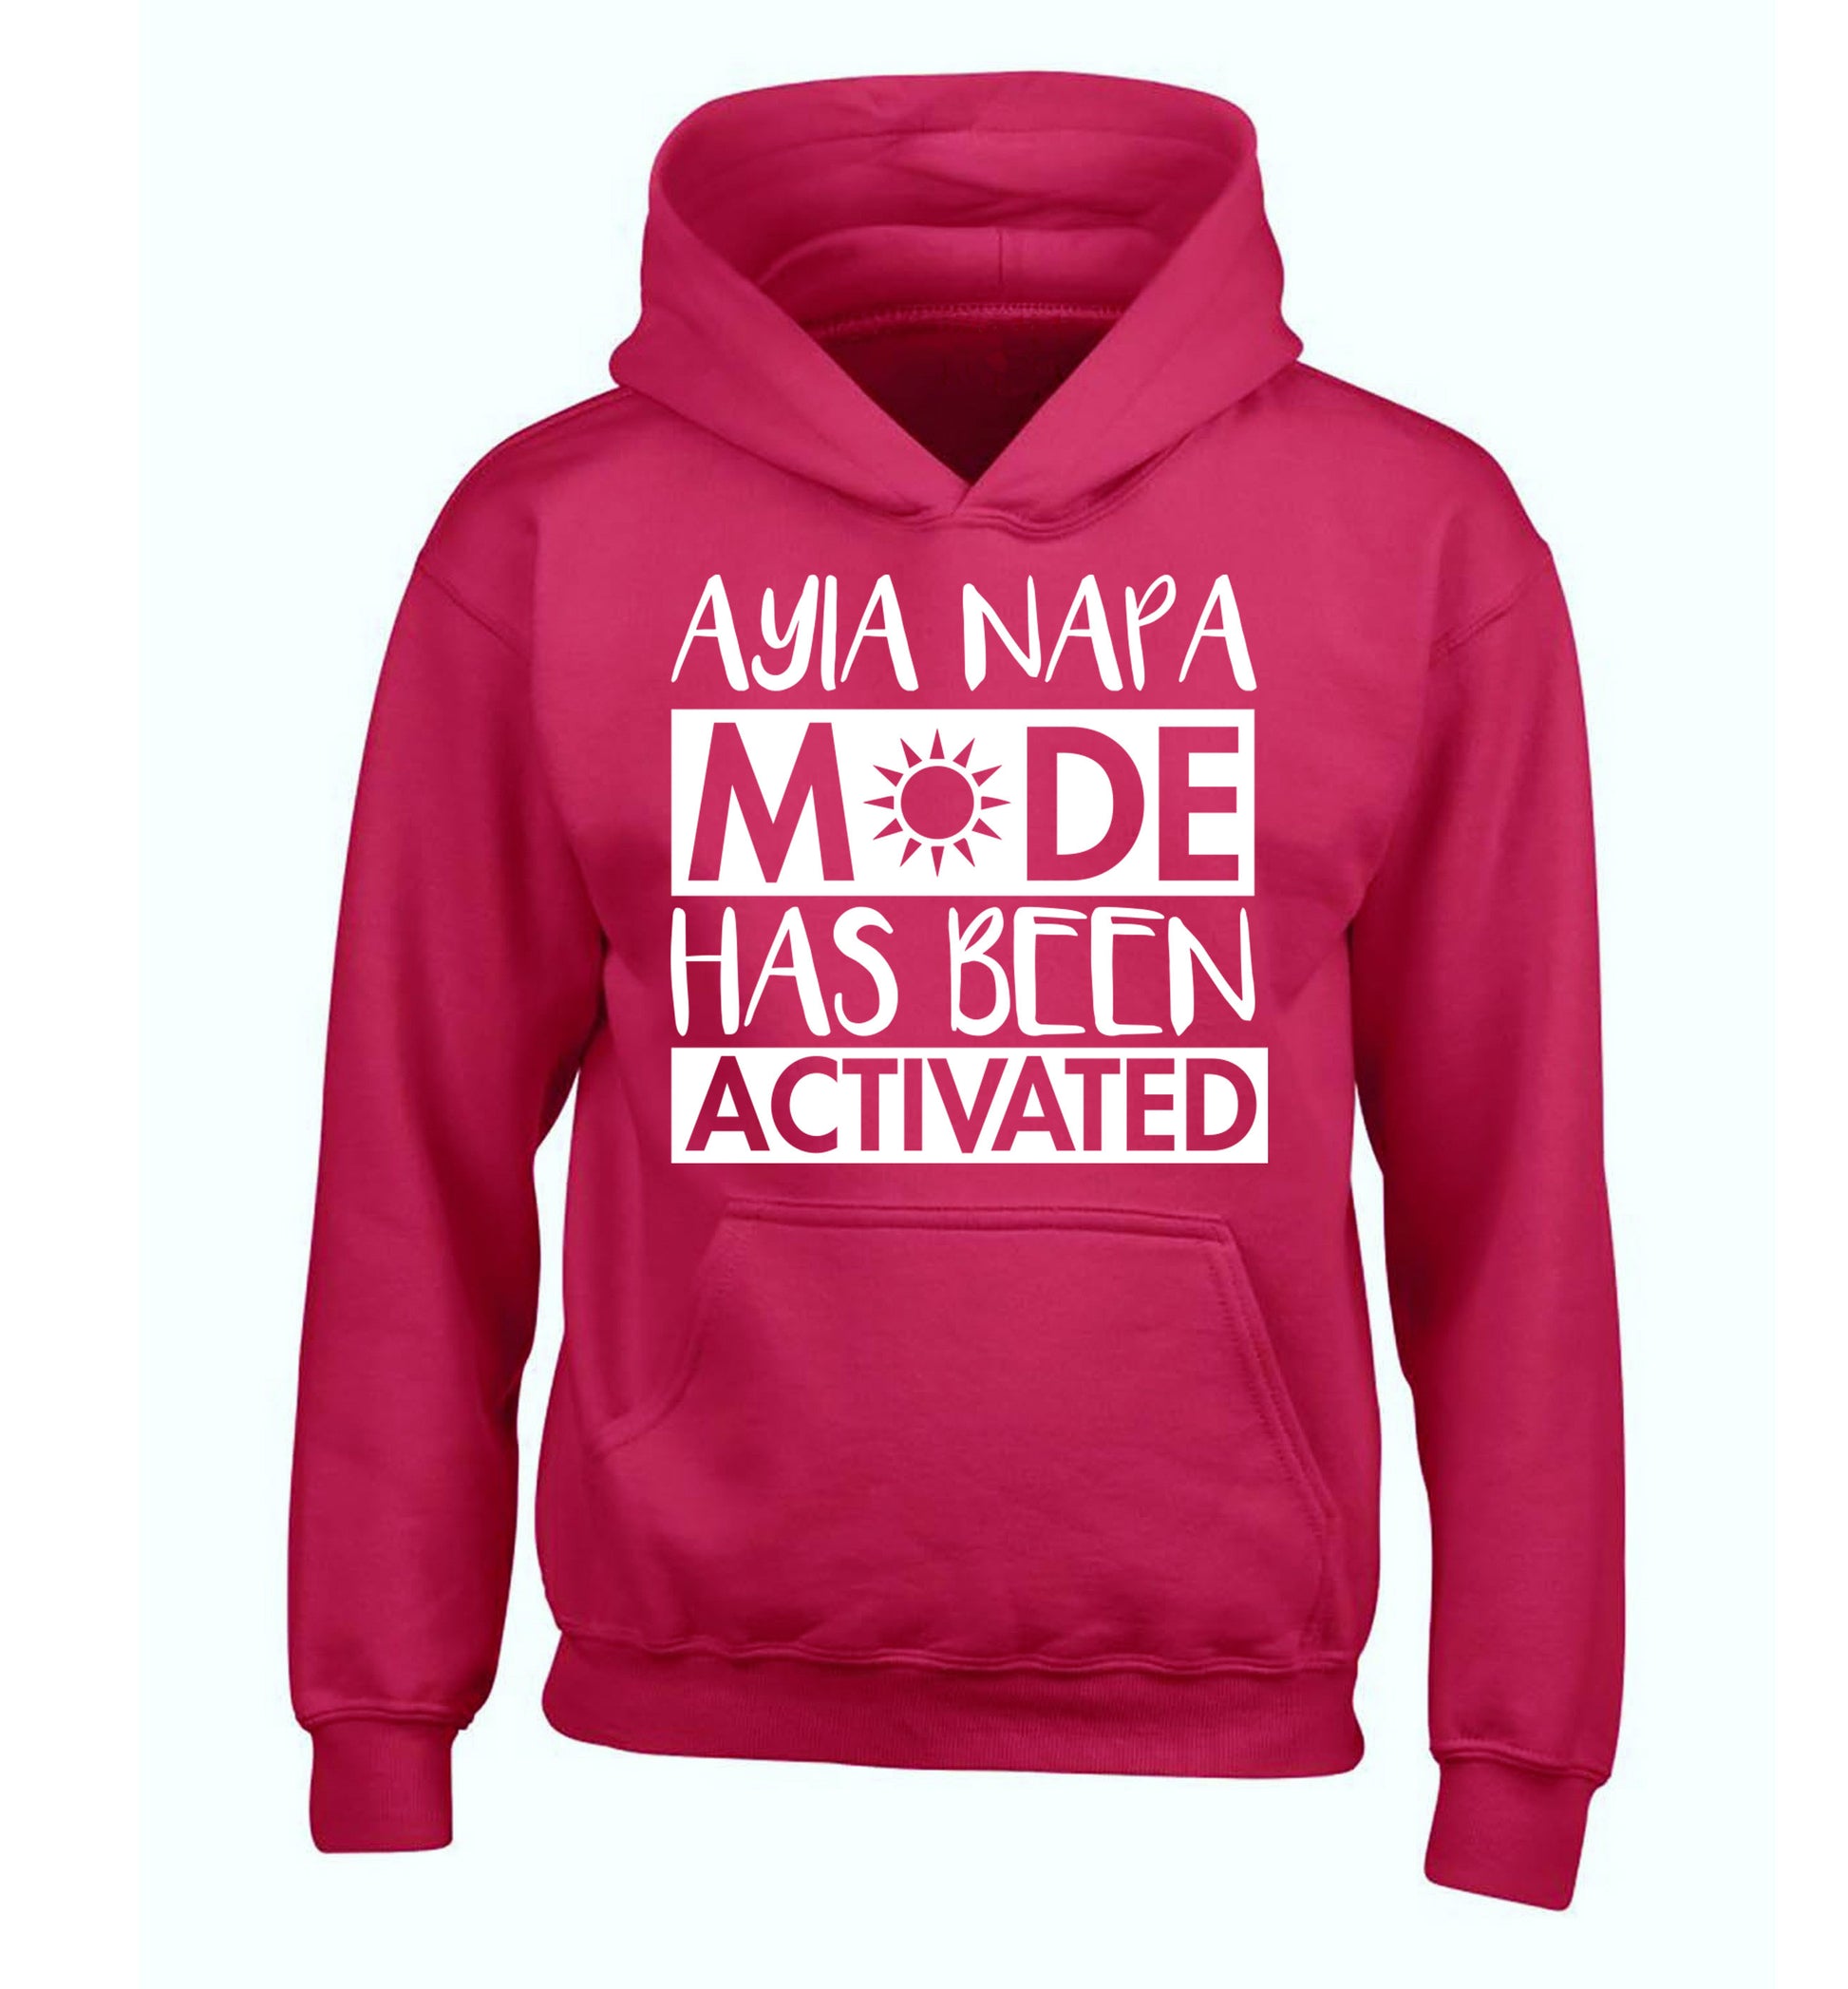 Aiya Napa mode has been activated children's pink hoodie 12-14 Years